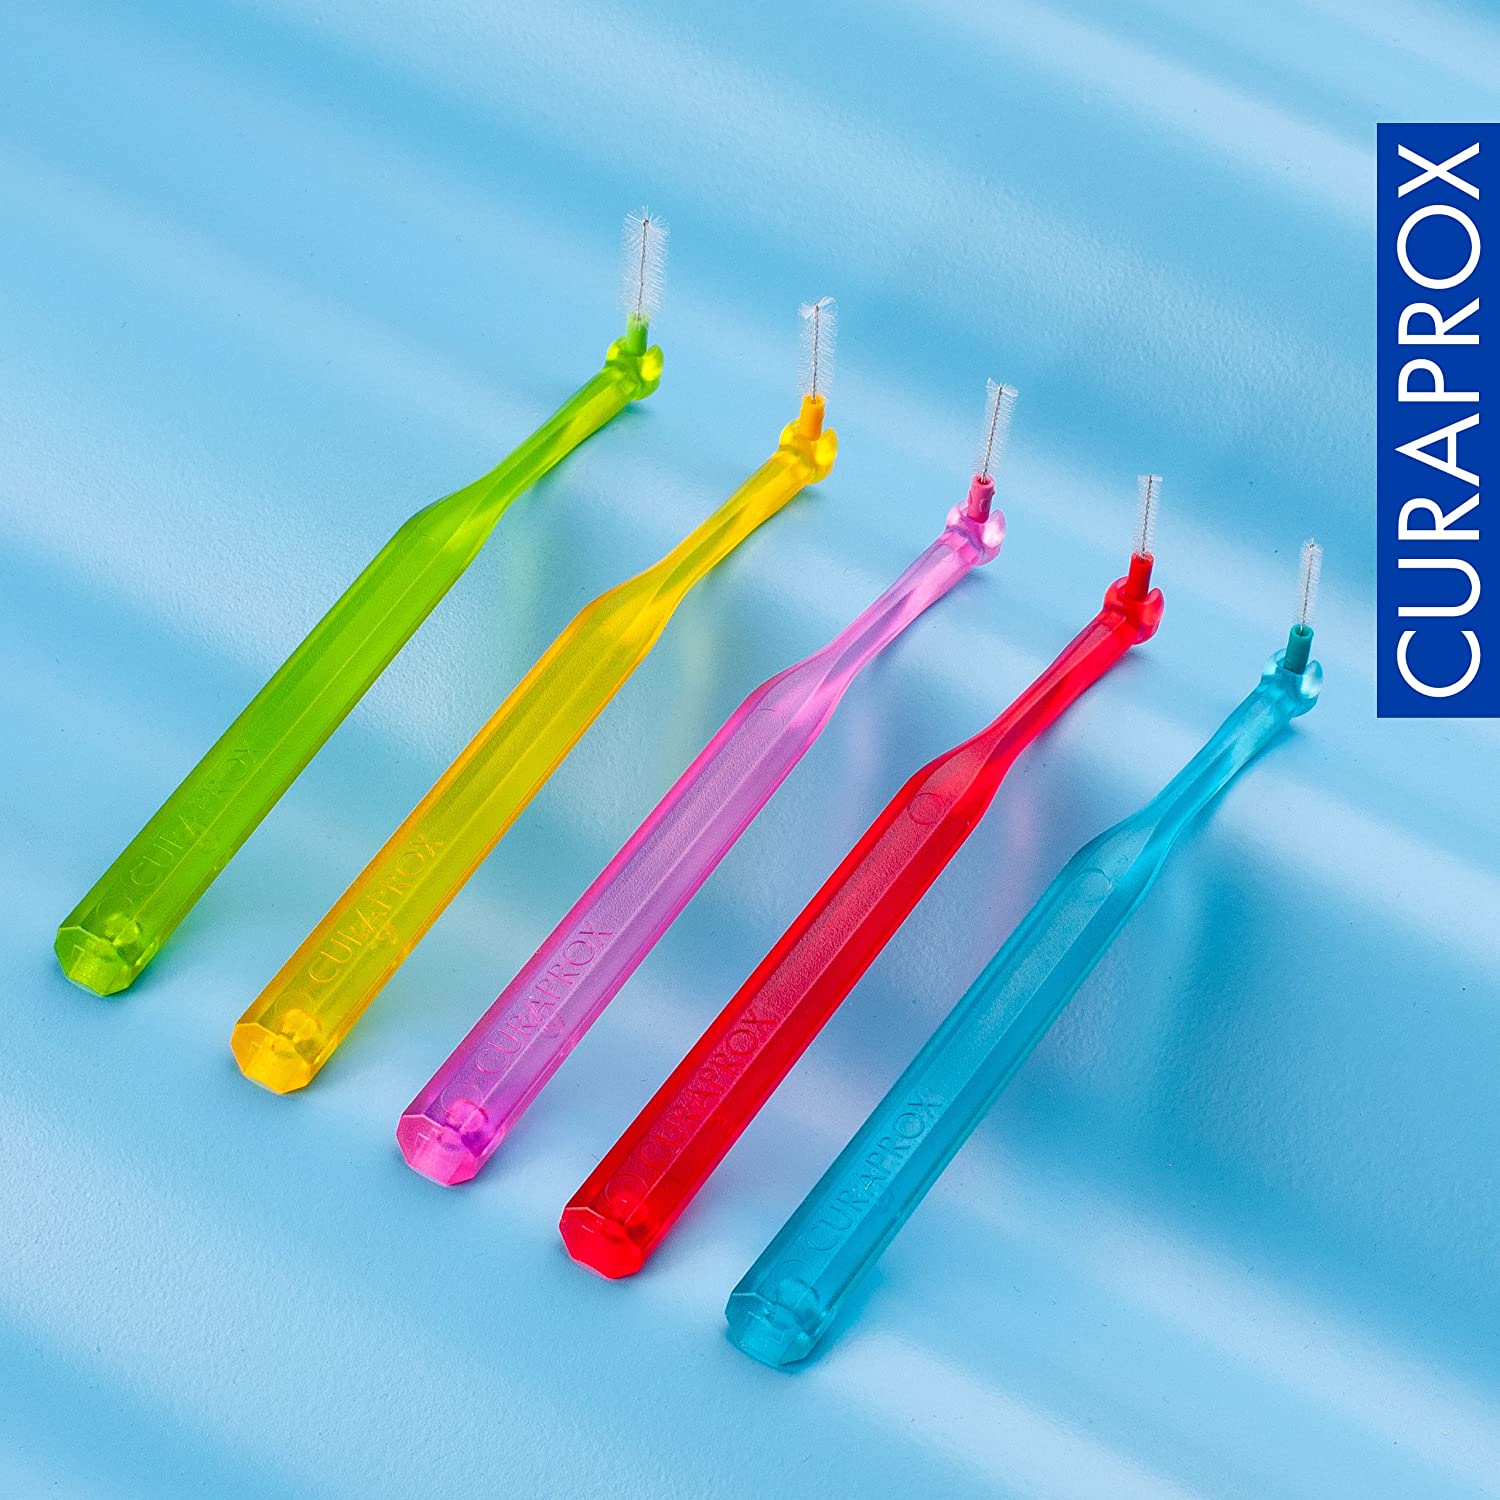 Curaprox Prime Plus Interdental Brushes Mixed Set